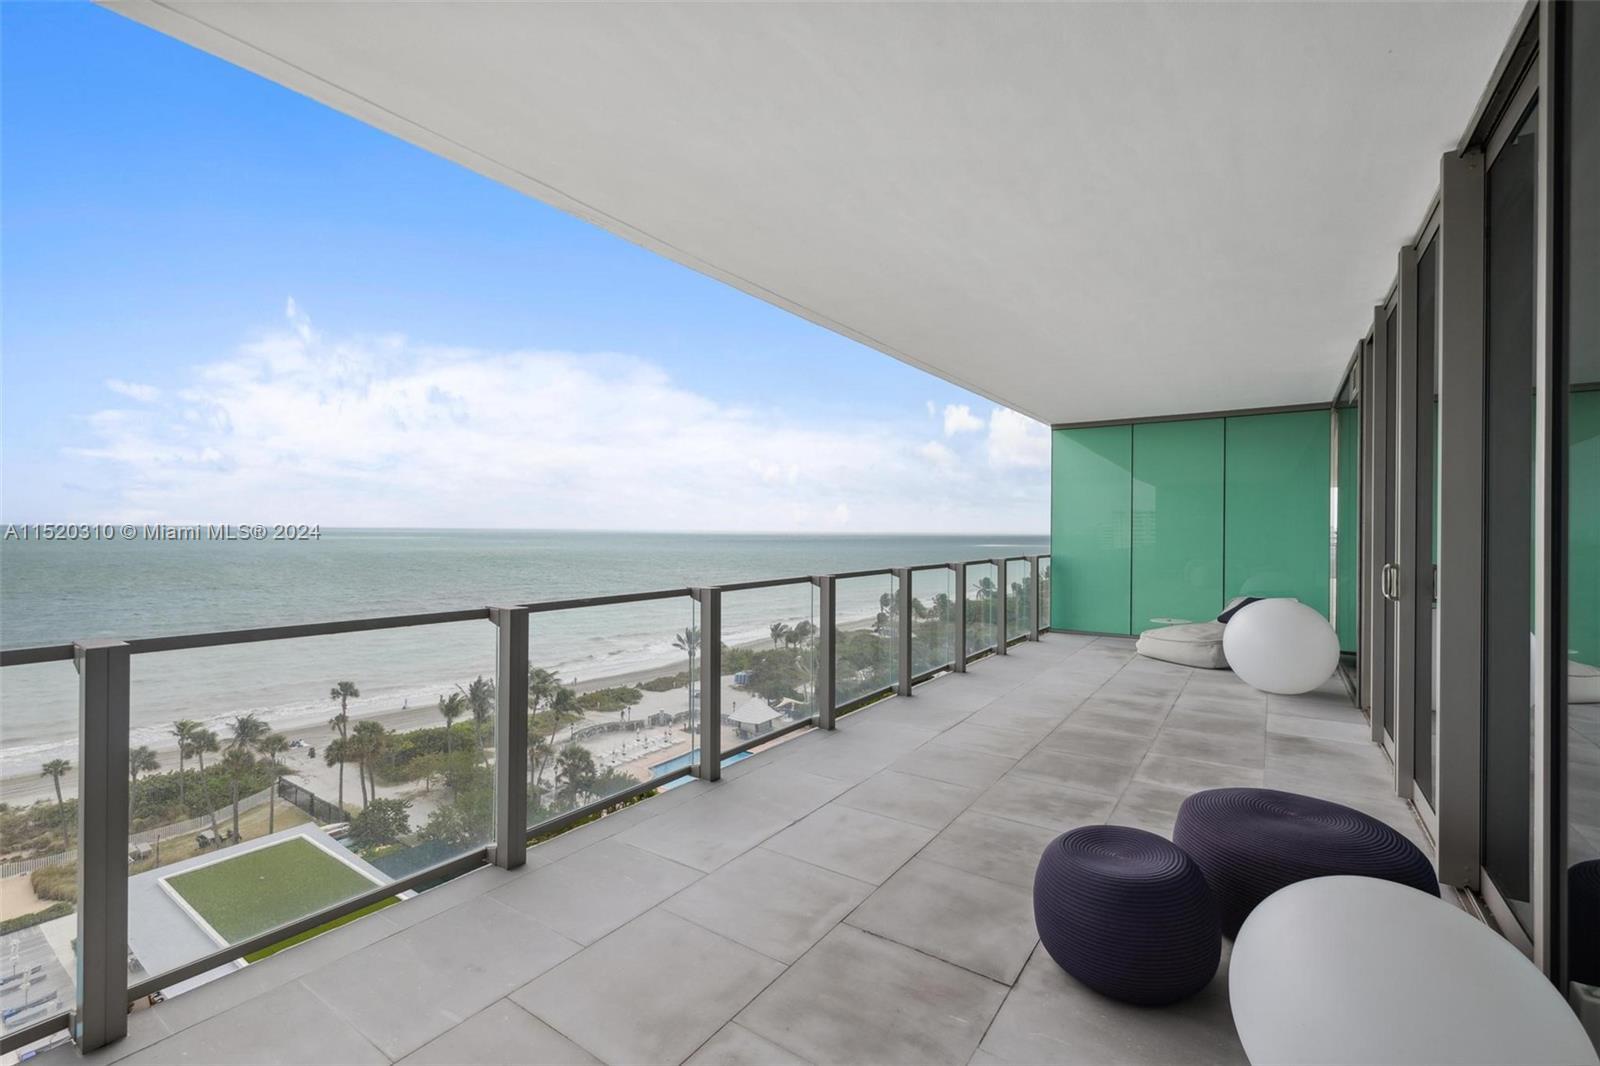 Welcome to this outstanding waterfront design by renowned architect Ramon Alonso at Oceana the most 